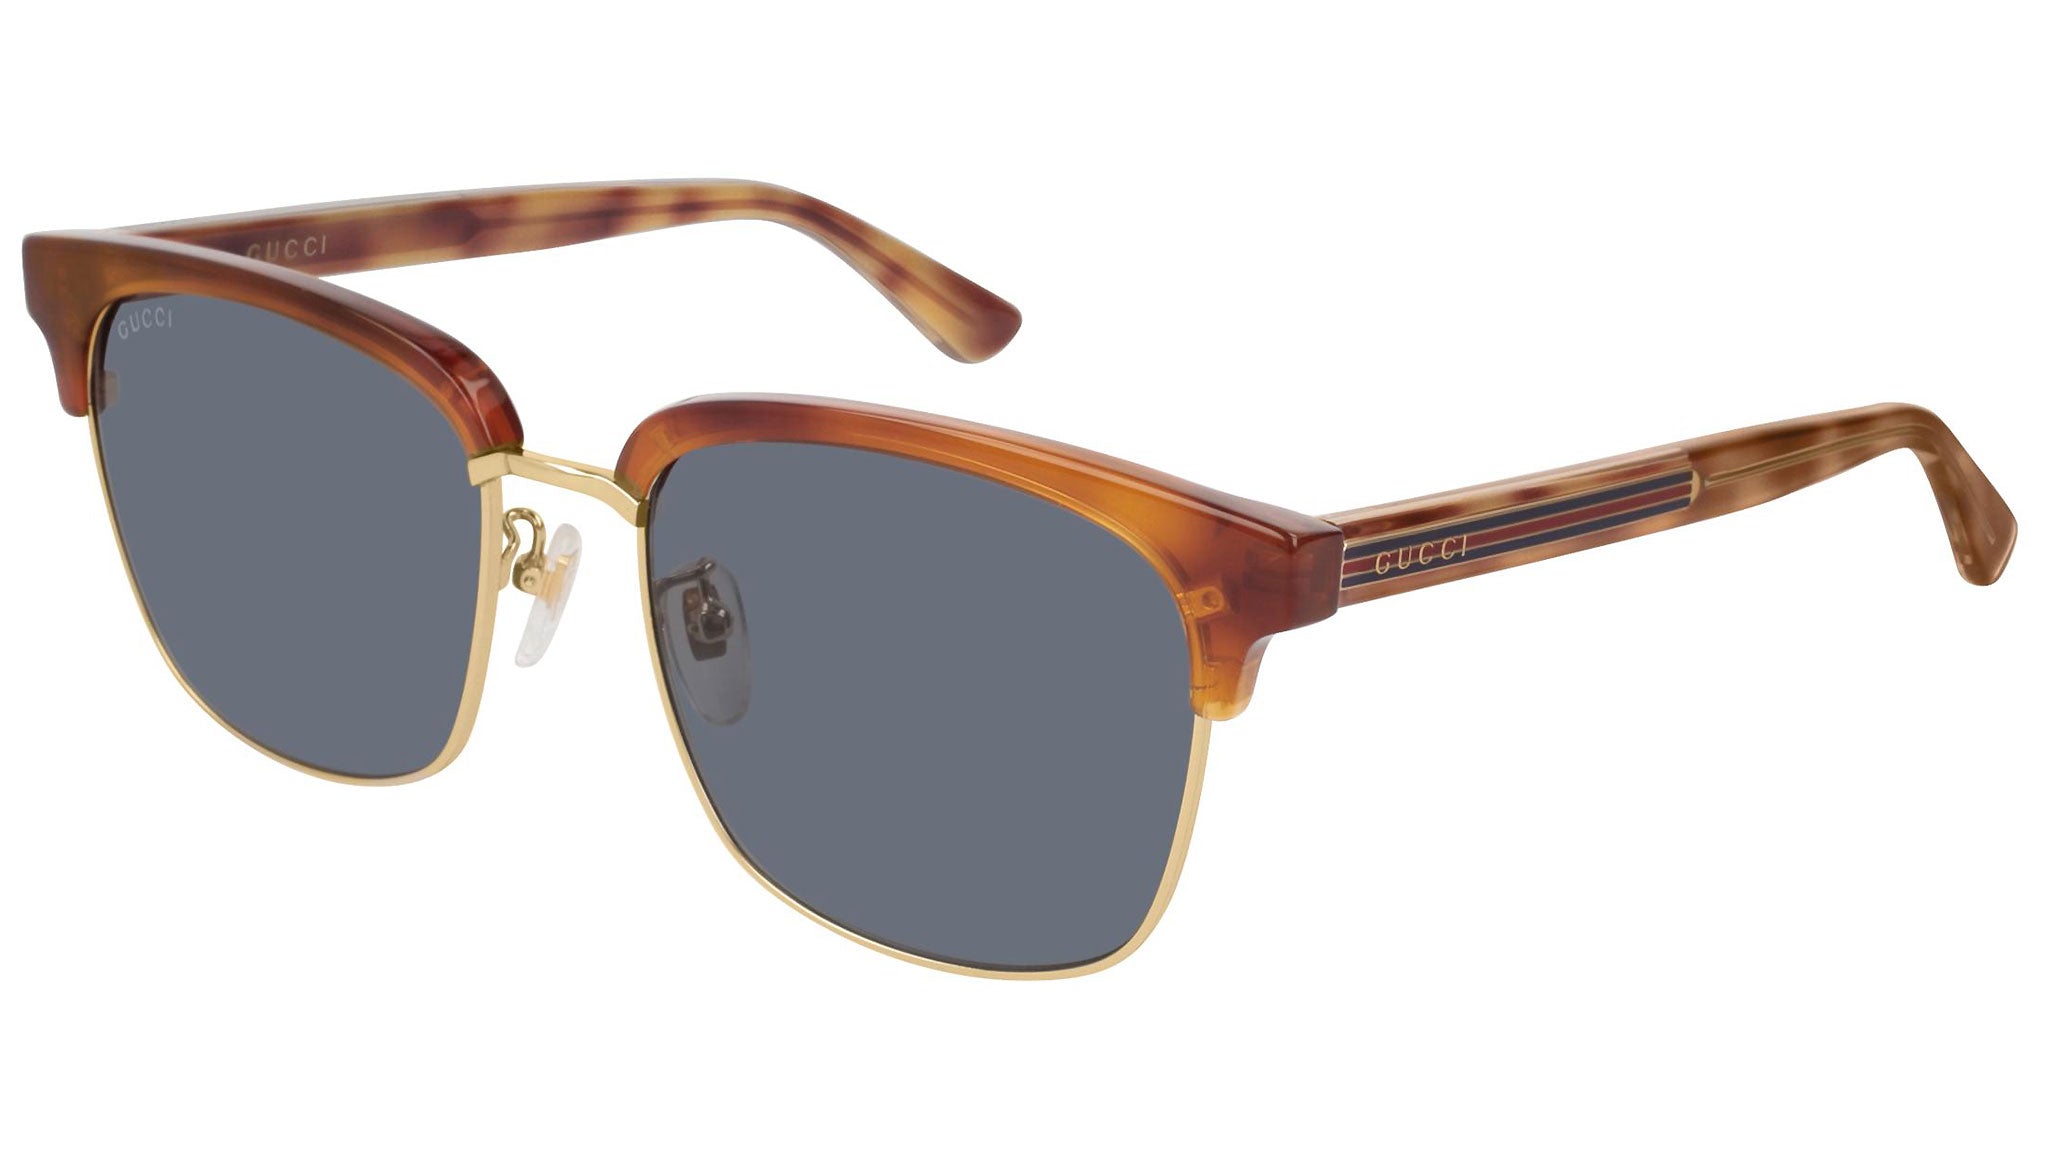 GG0382S gold tortoise and blue